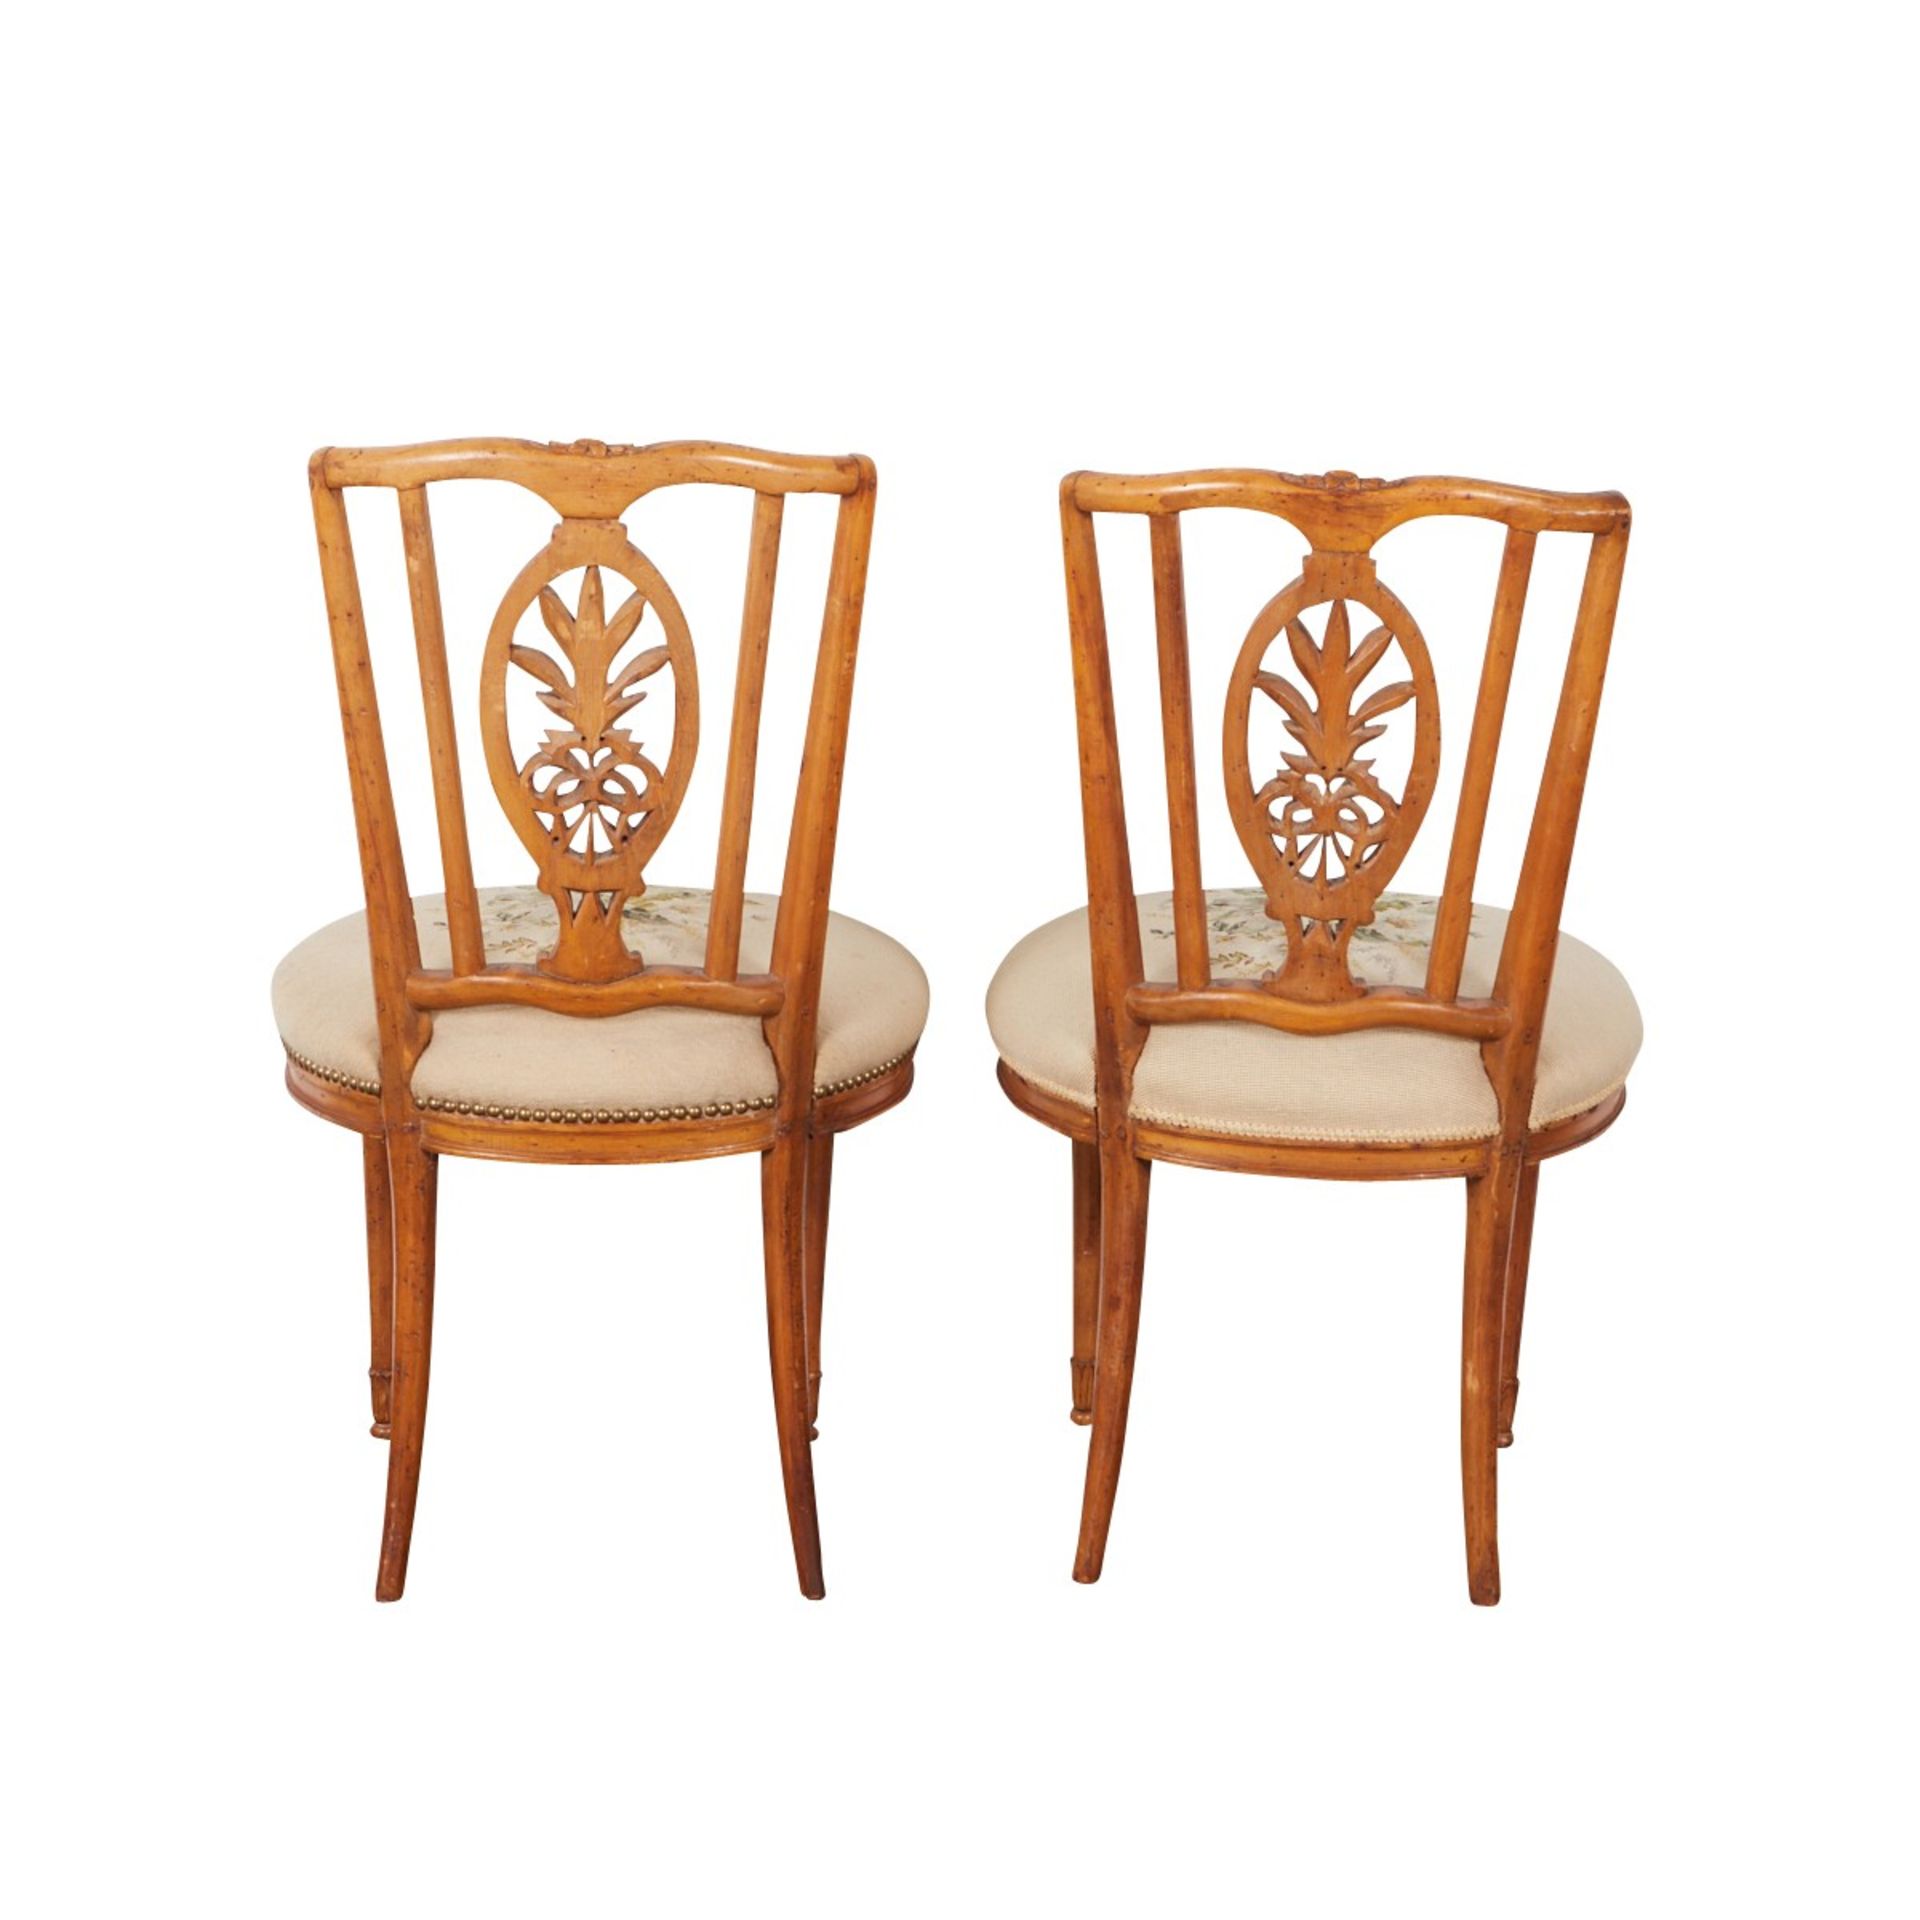 Pr French Side Chairs w/ Floral Decoration - Image 4 of 10